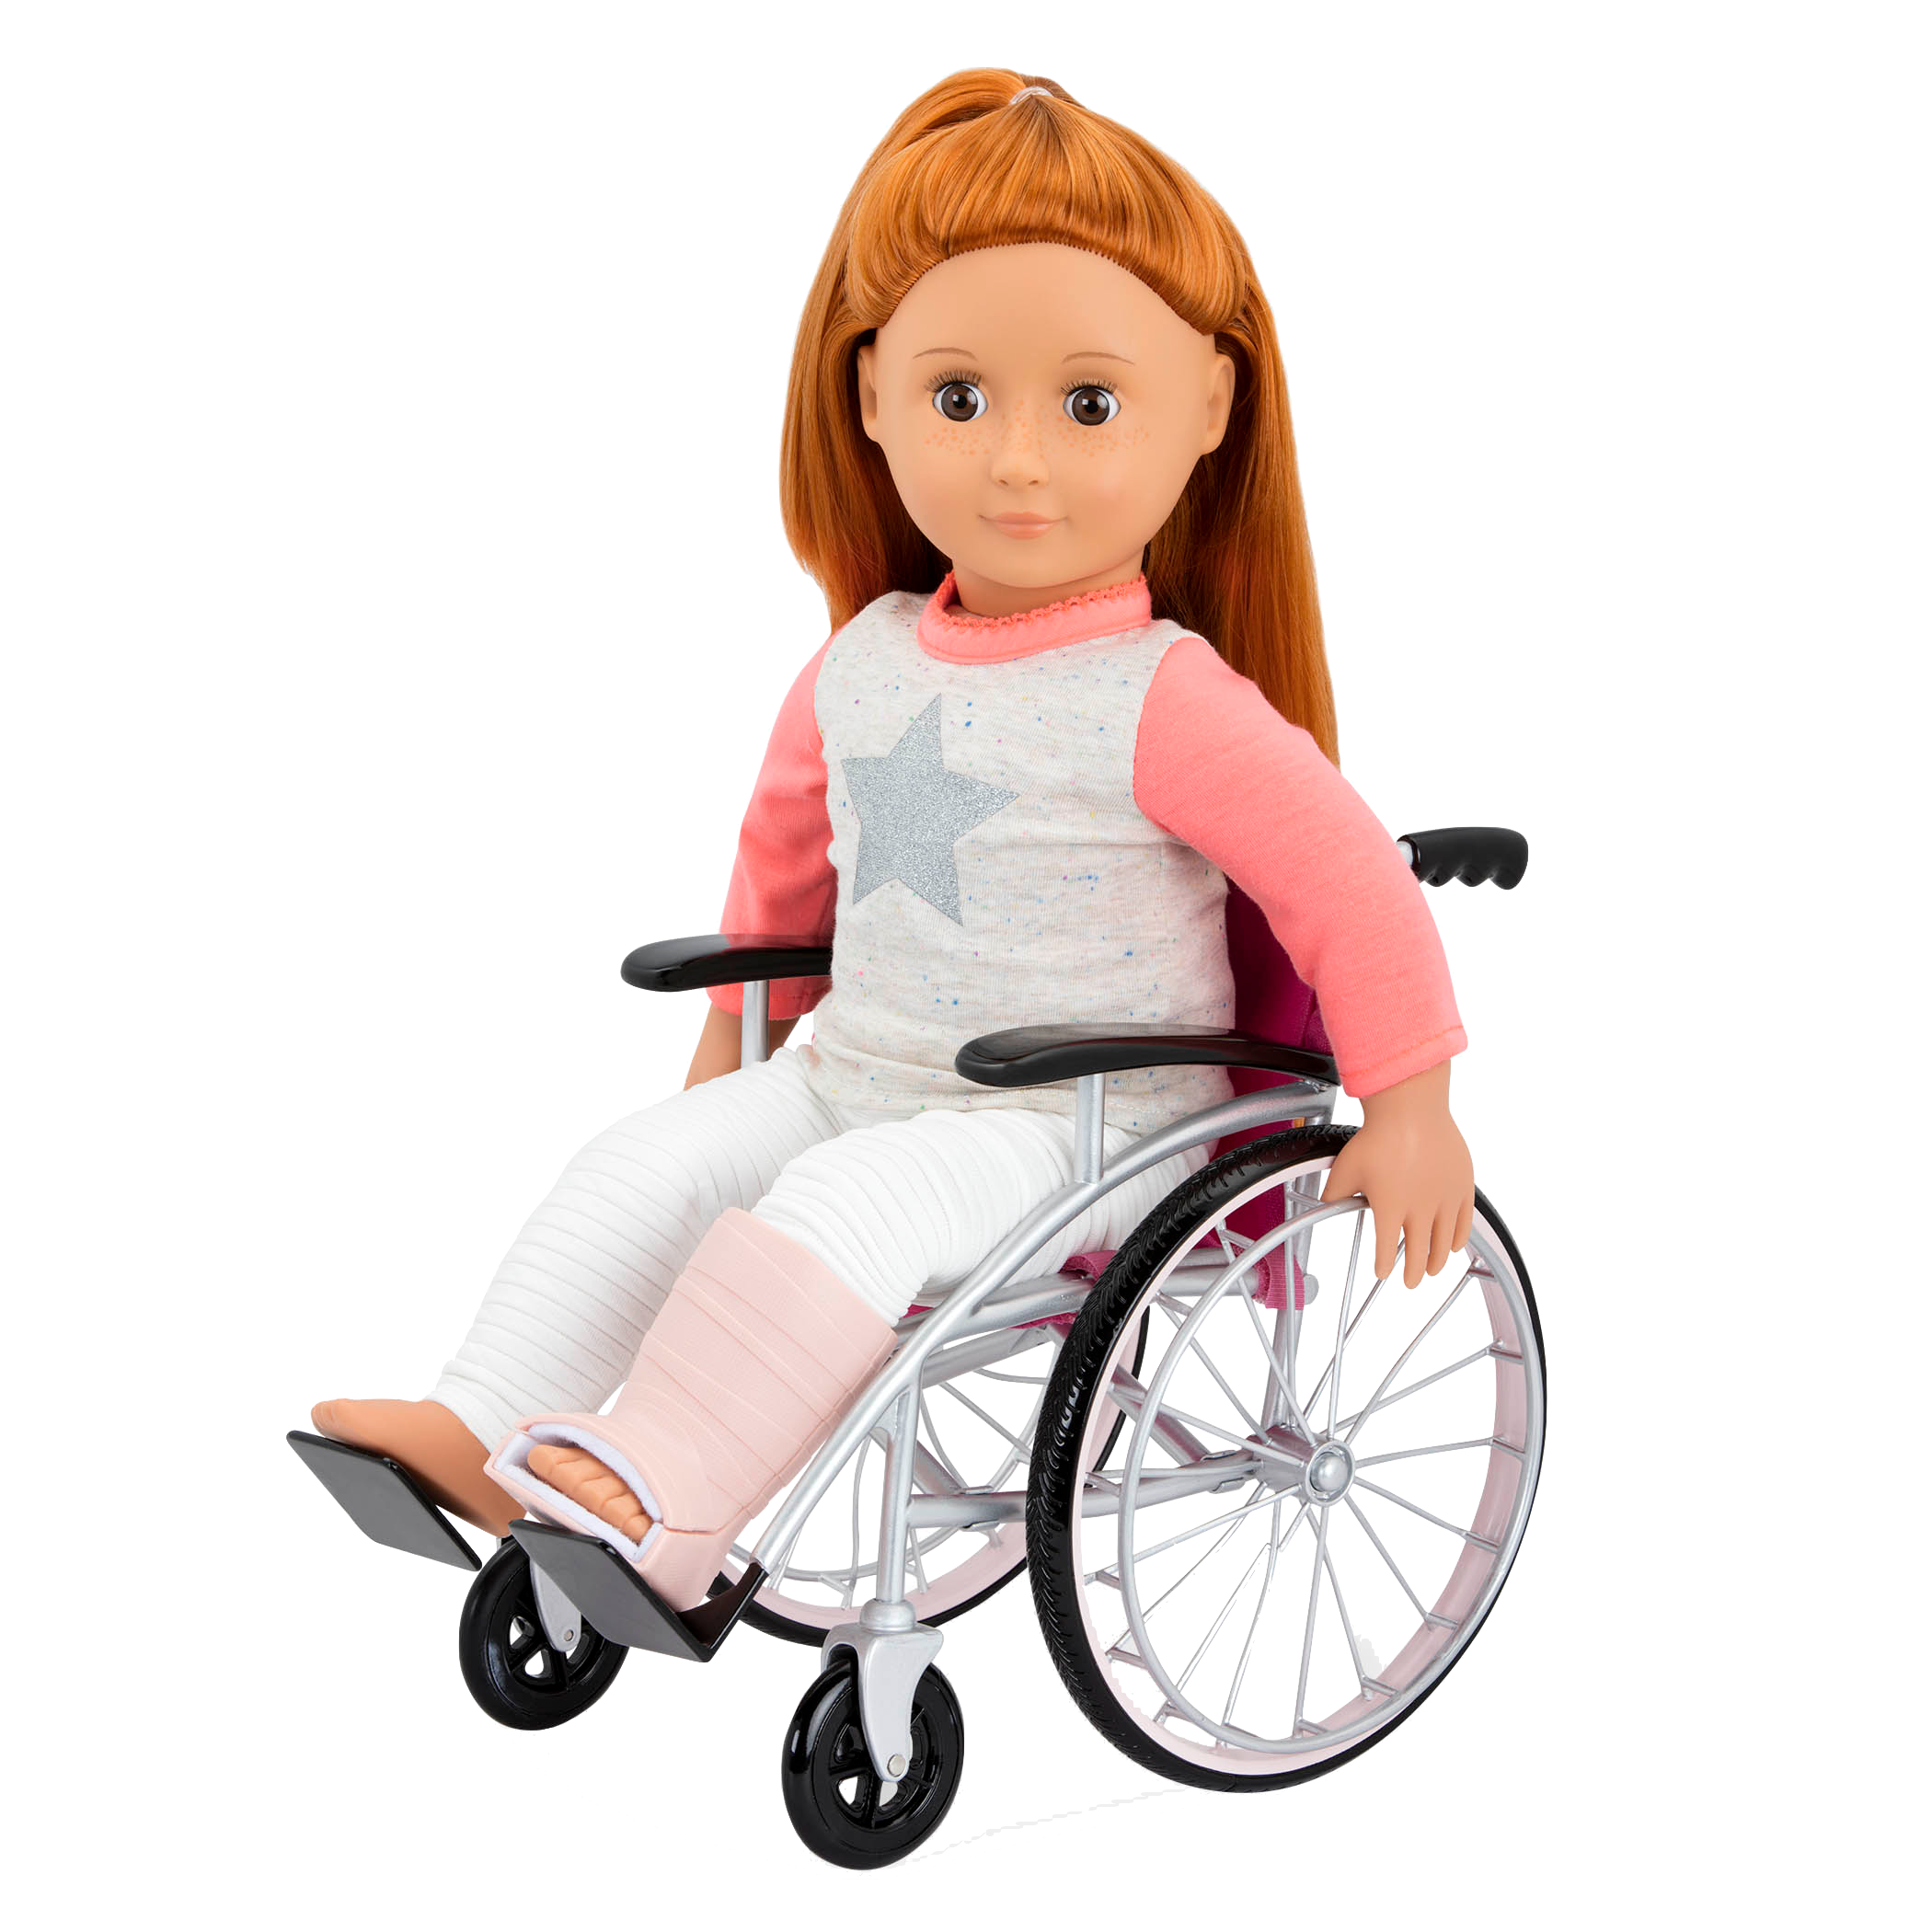 18-inch doll using medical playset and wheelchair